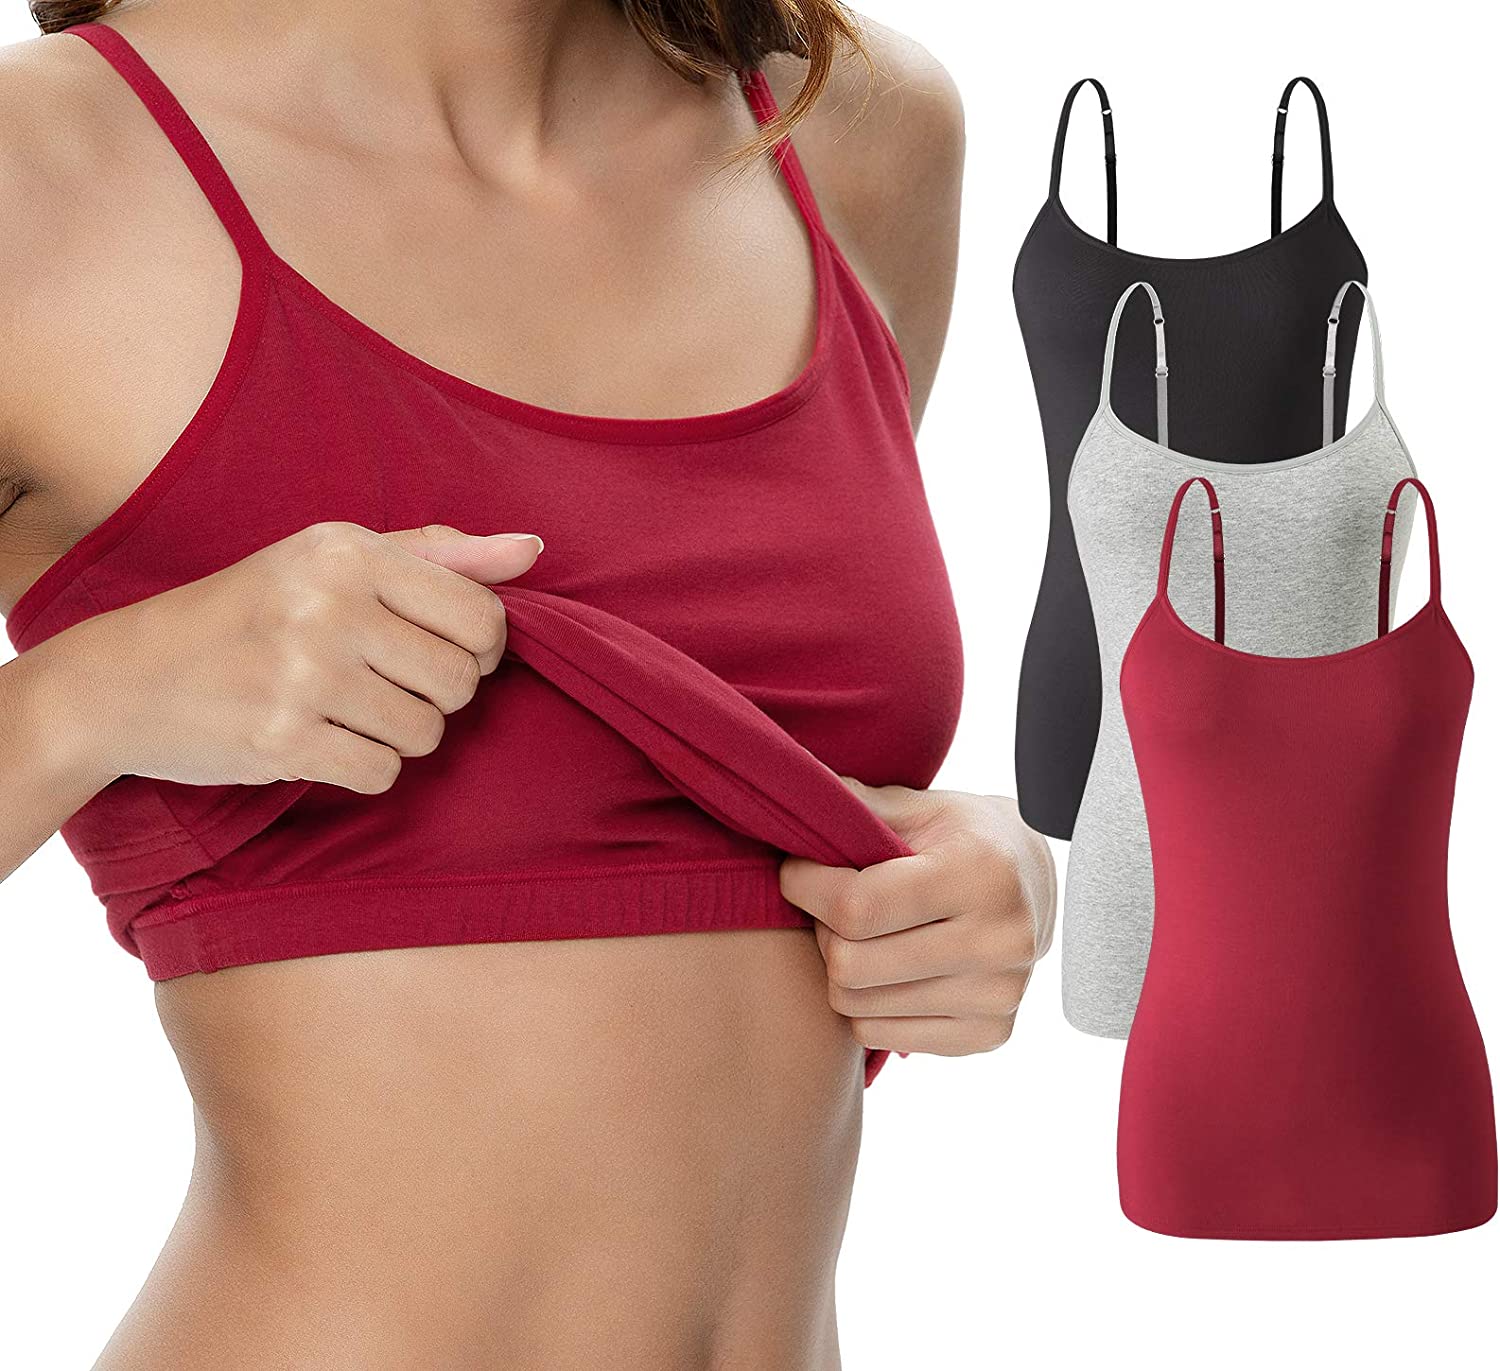 Price:$18.99 Vislivin Womens Cotton Camisole Adjustable Strap Tank Tops with Shelf Bra Stretch Undershirts at Amazon Women’s Clothing store